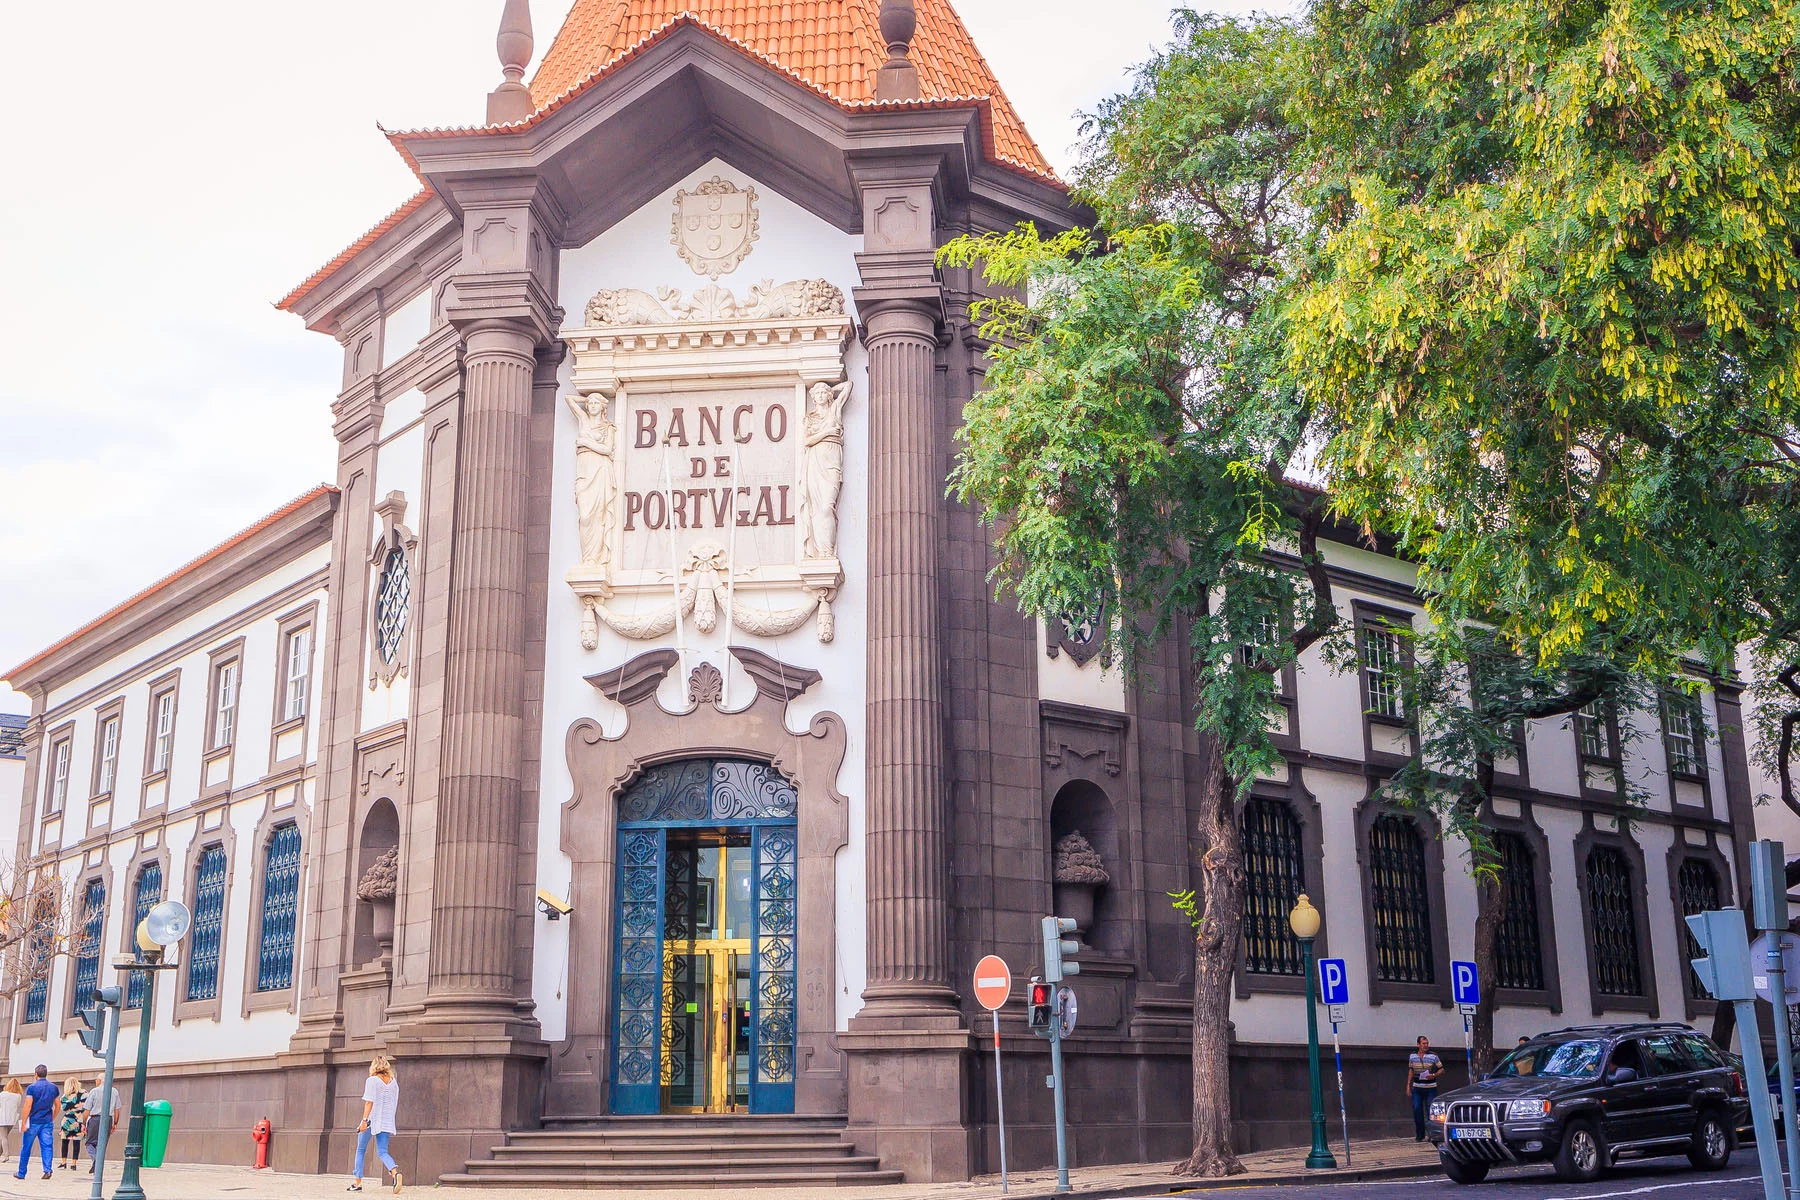 apply for home insurance: Banco de Portugal in Funchal